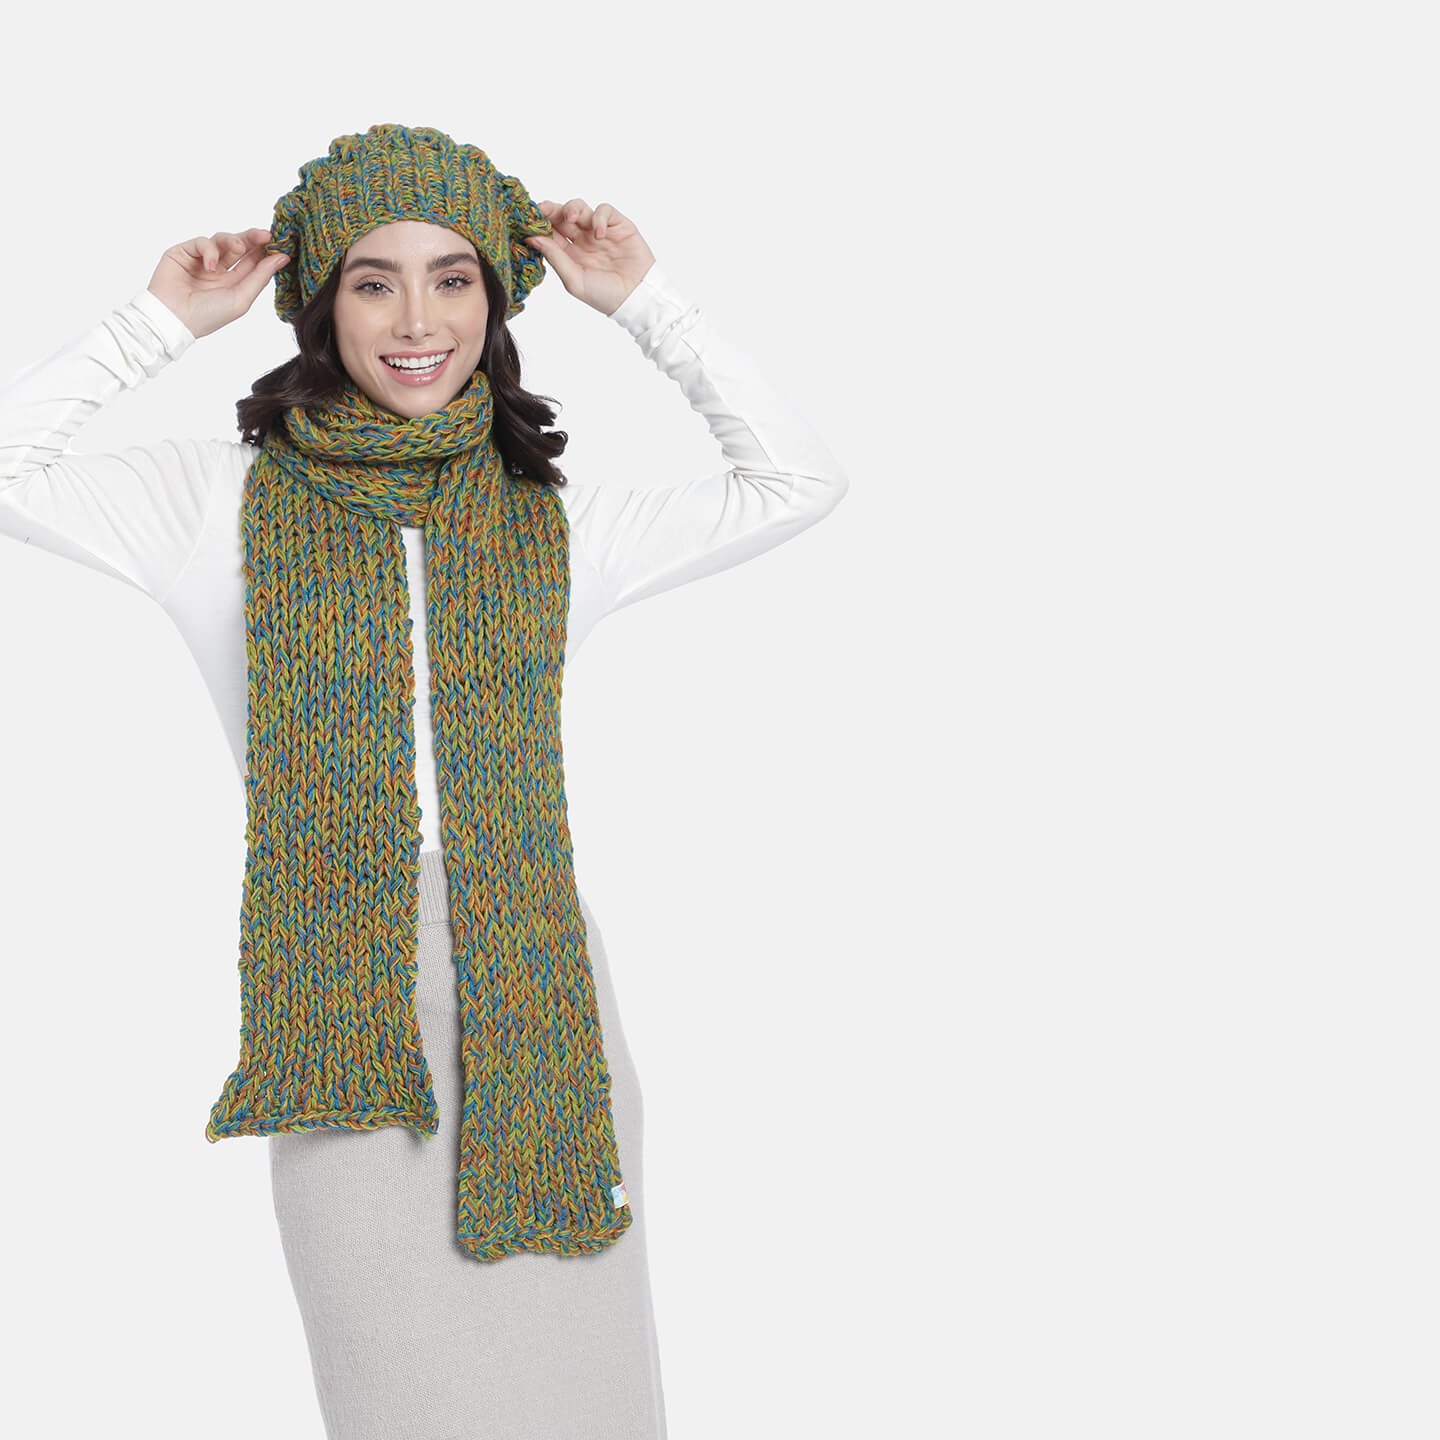 Beanie and Scarf Coordinating Set - 3177